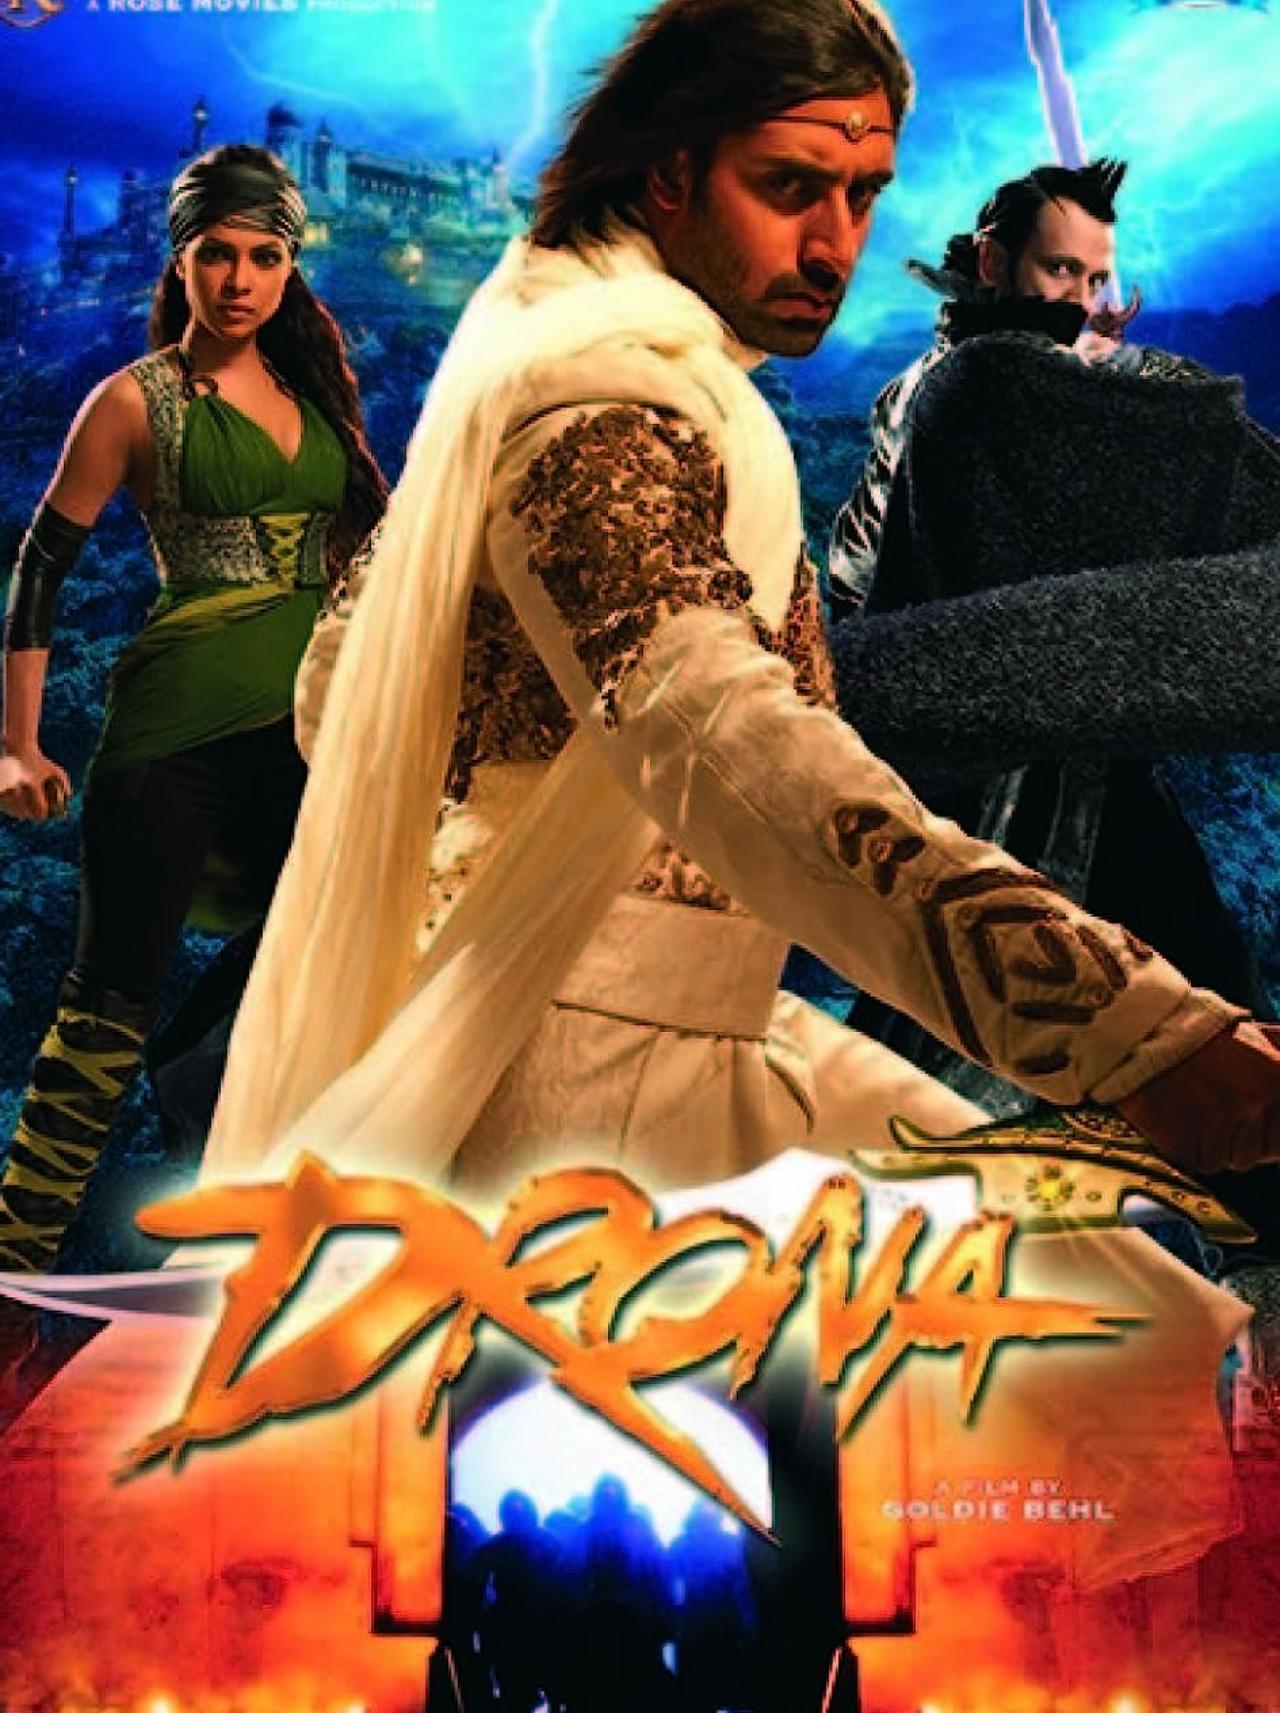 Leading ahead in the lowest rated films of Priyanka Chopra, is the 2008 action-drama 'The Legends of Drona' also starring Abhishek Bachchan